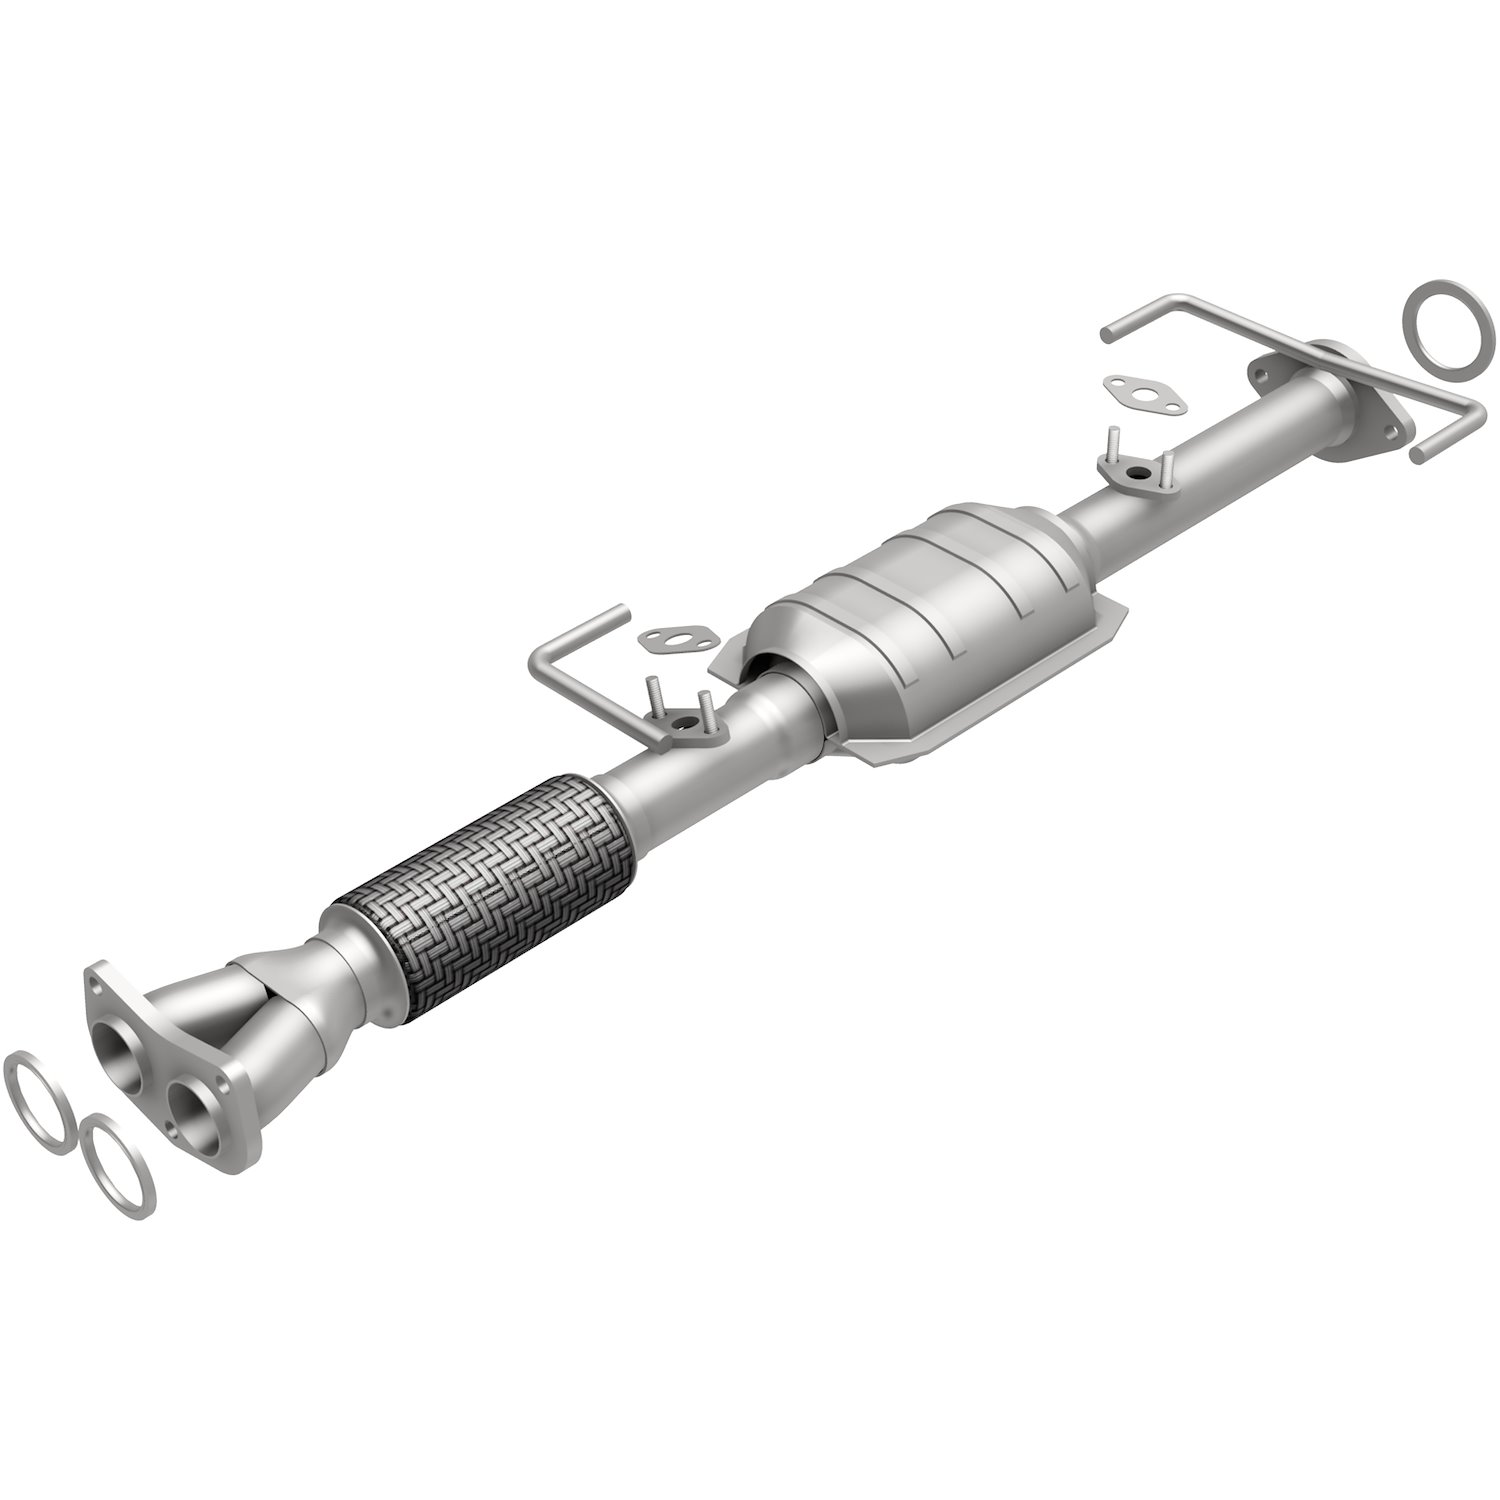 Direct-Fit Catalytic Converter 1994-97 Previa 2.4L (Front)